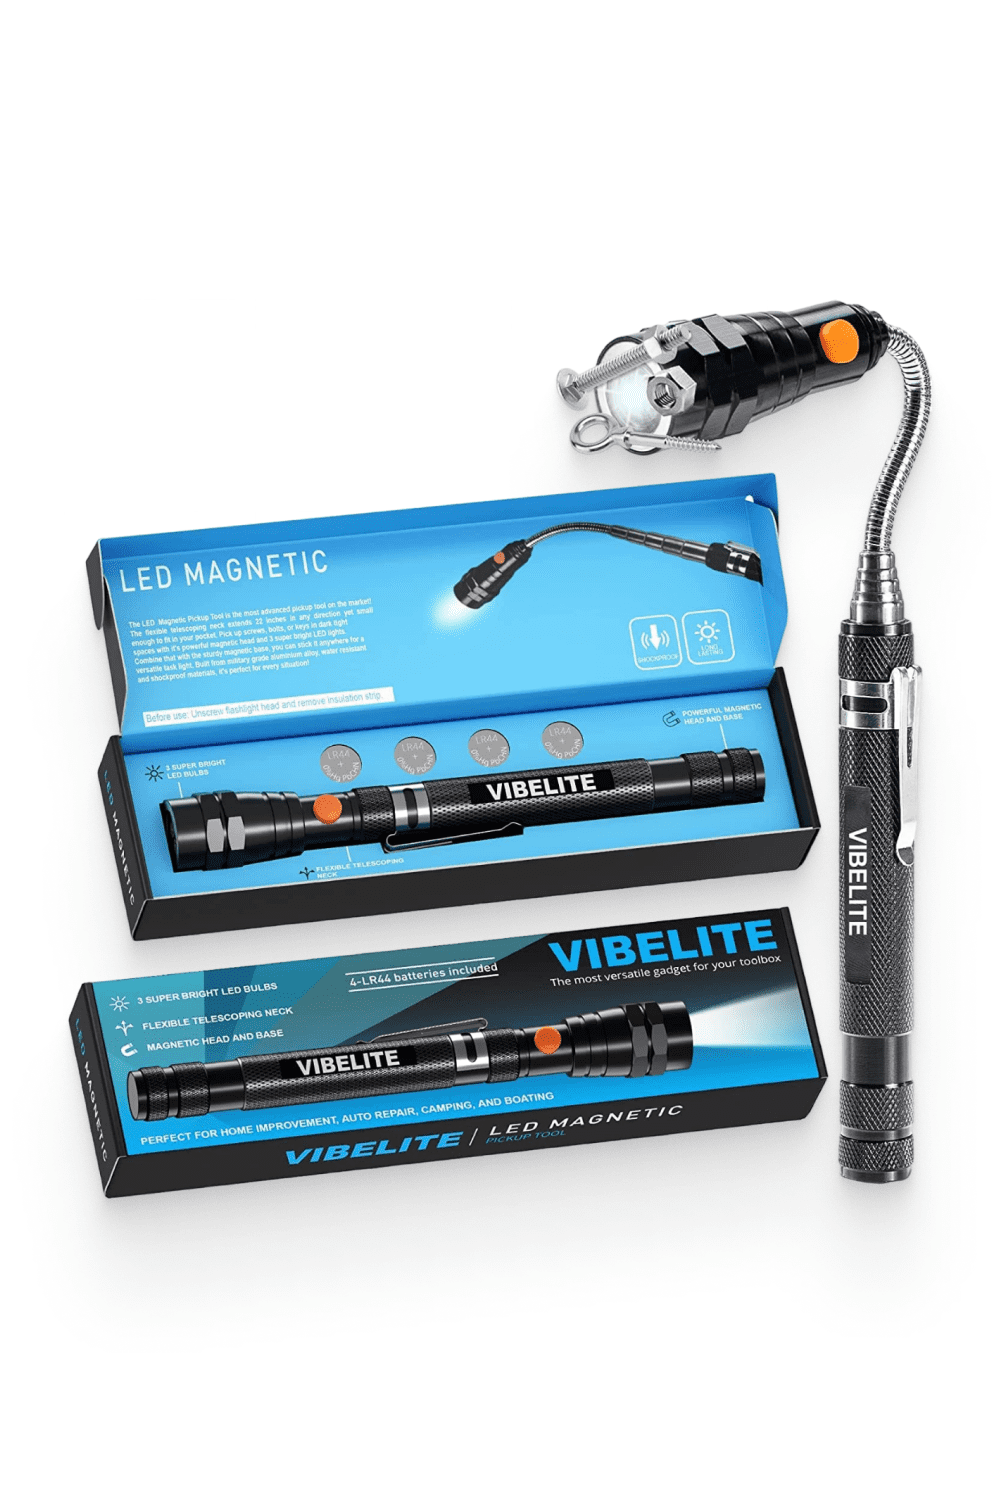 VIBELITE Extendable Magnetic Flashlight with Telescoping Magnet Pickup Tool-Cool Gadgets.